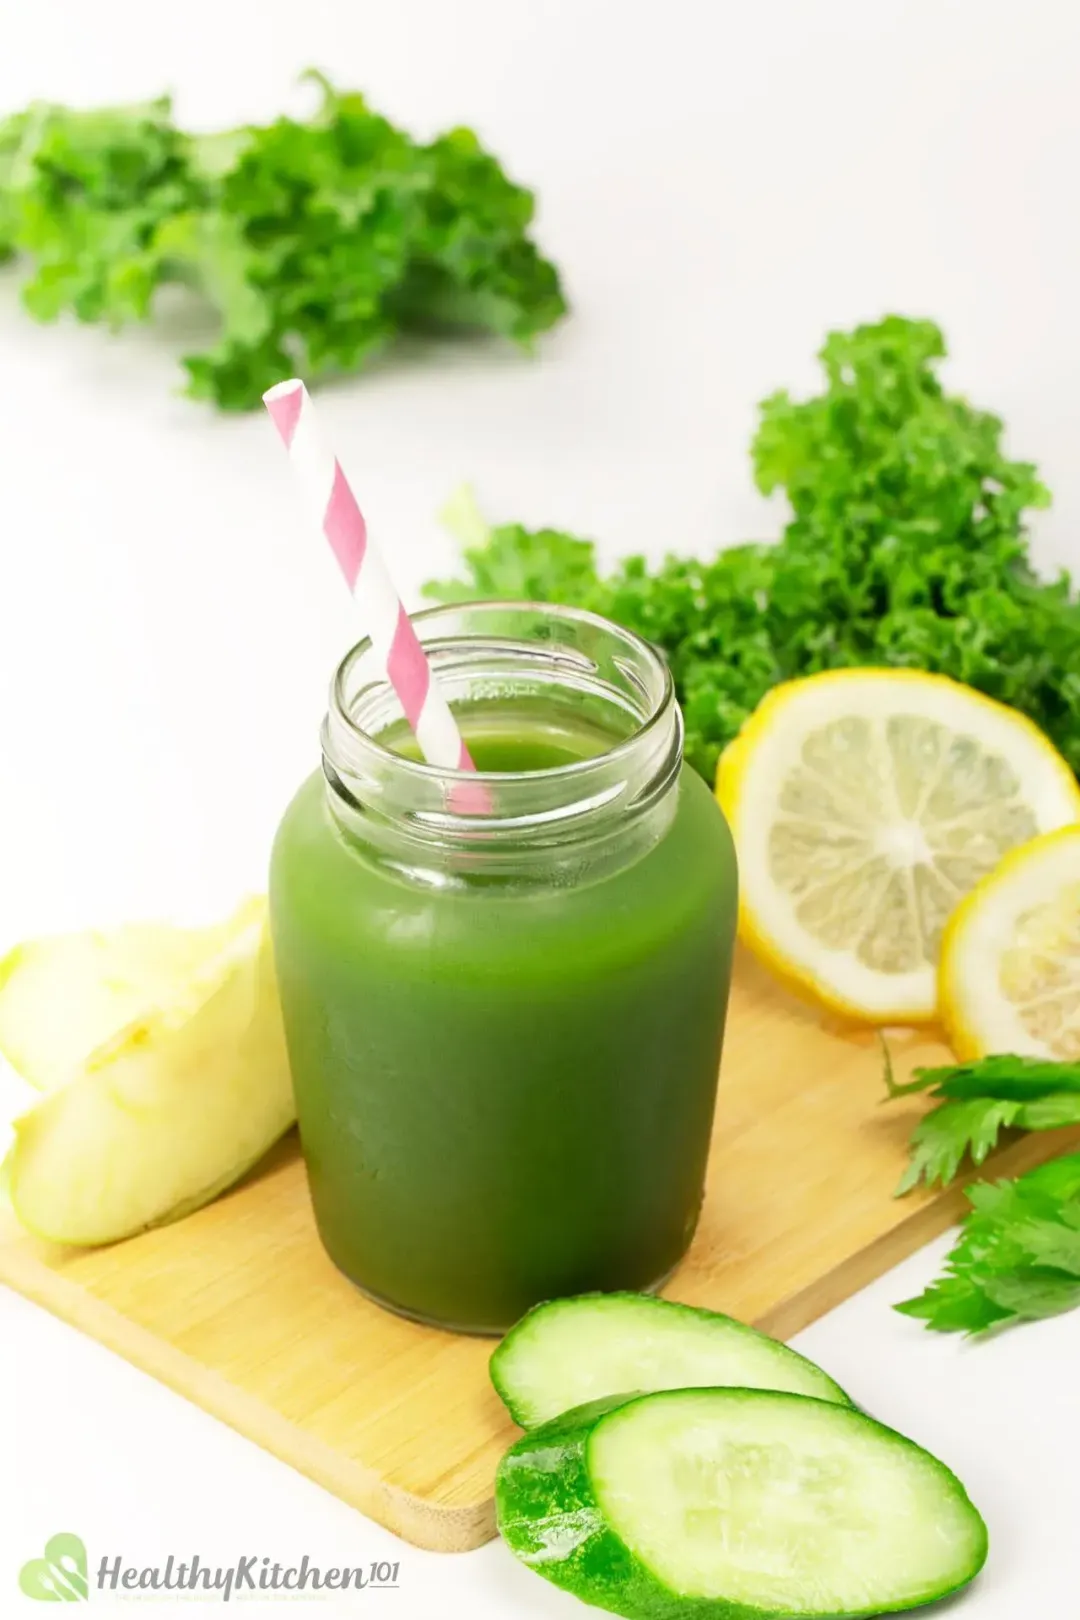 A small jar of green vegetable juice with a pink-striped straw dunked in, on a wooden plank with lemon wheels, cucumber slices, and kale